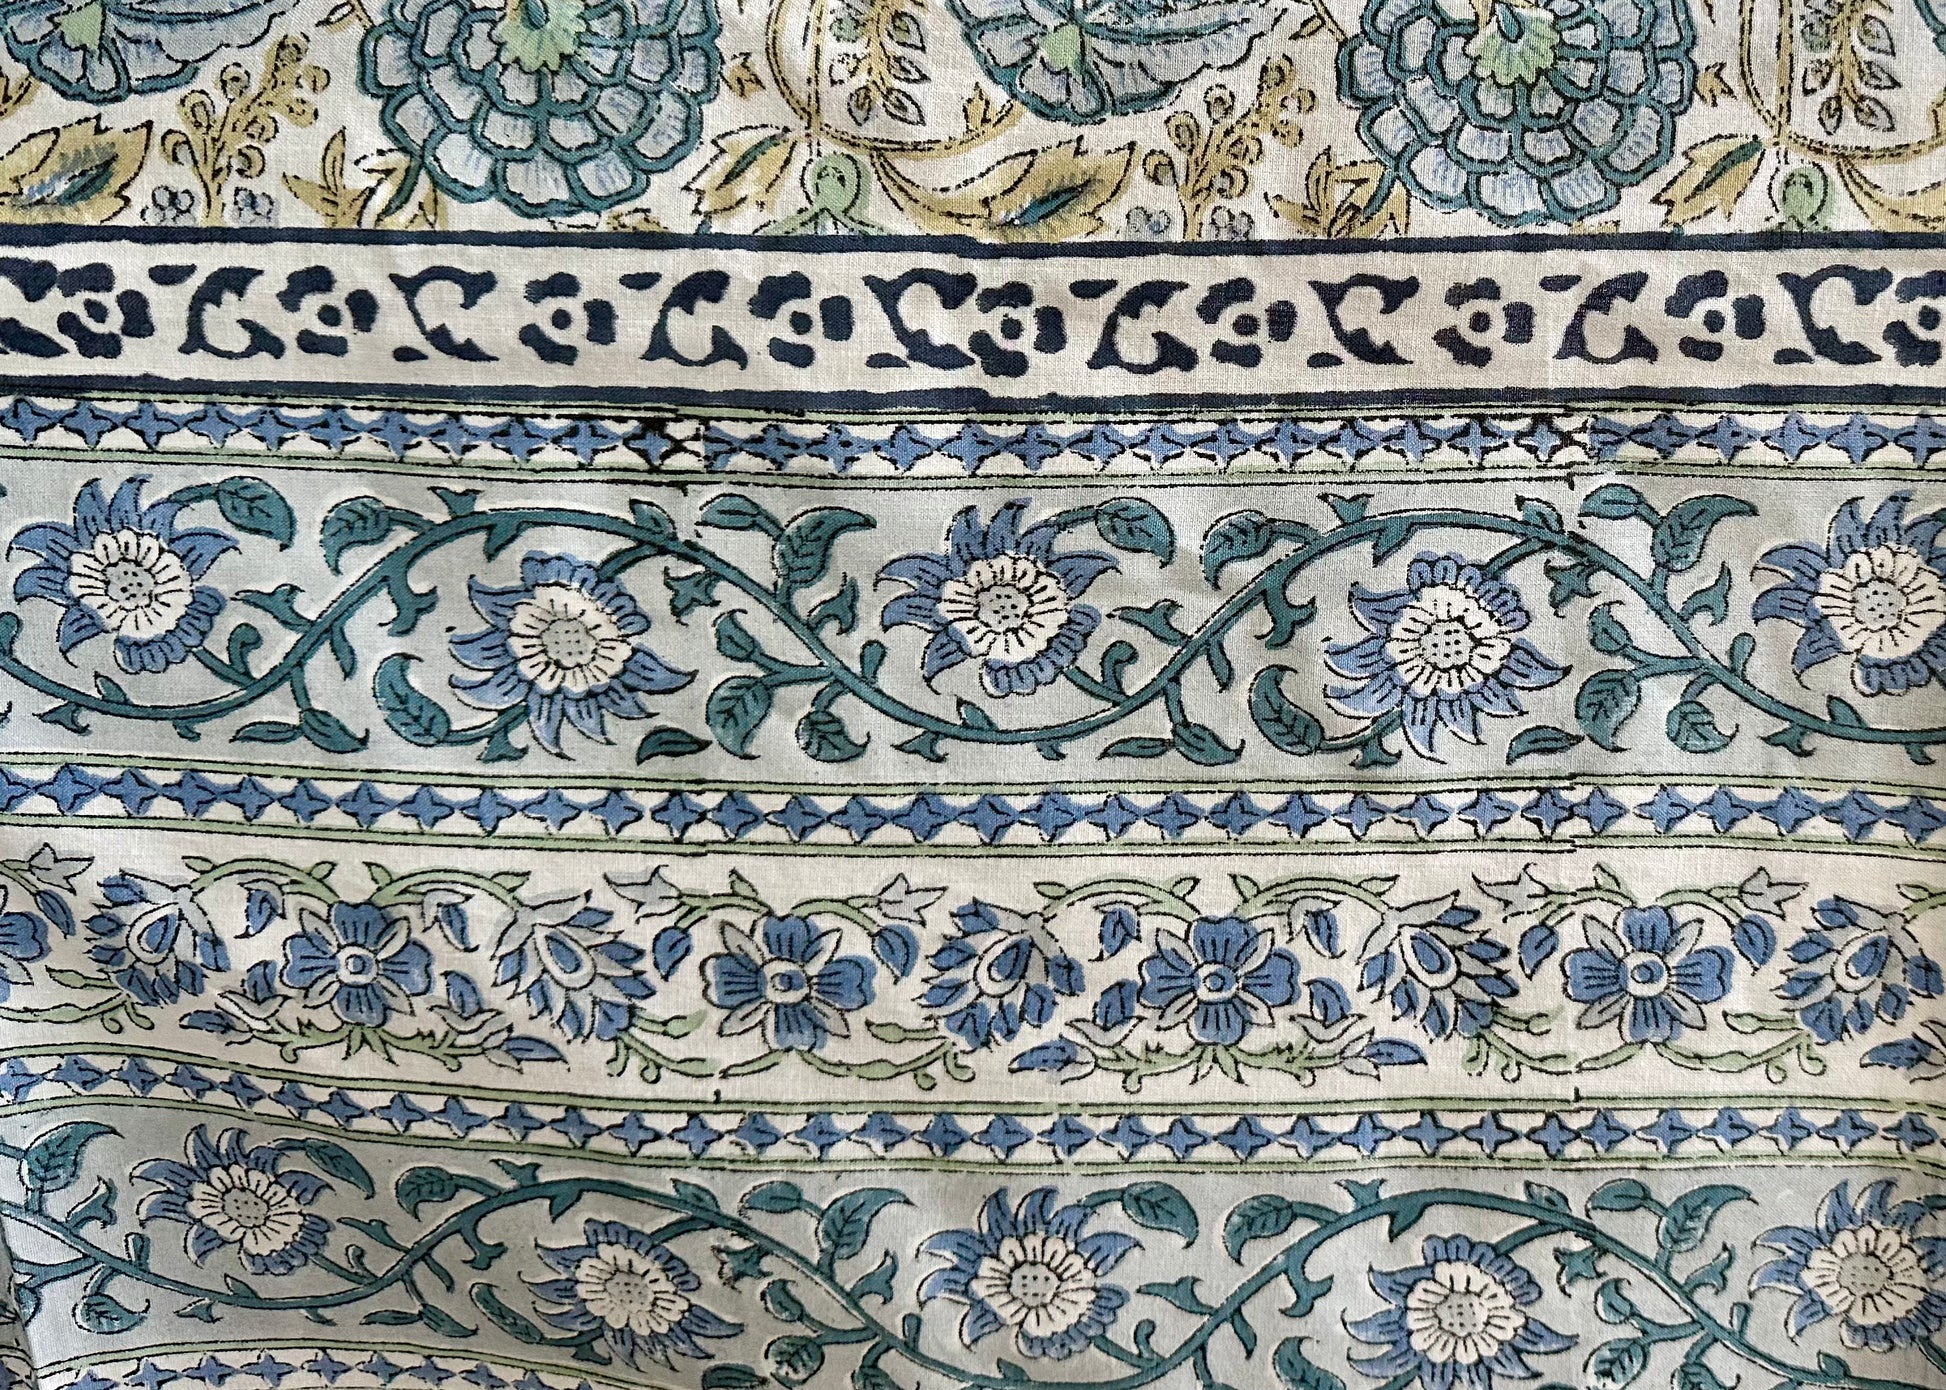 Handblock Printed Tablecloth in Blue and Green with Mughal Floral Pattern - DharBazaar